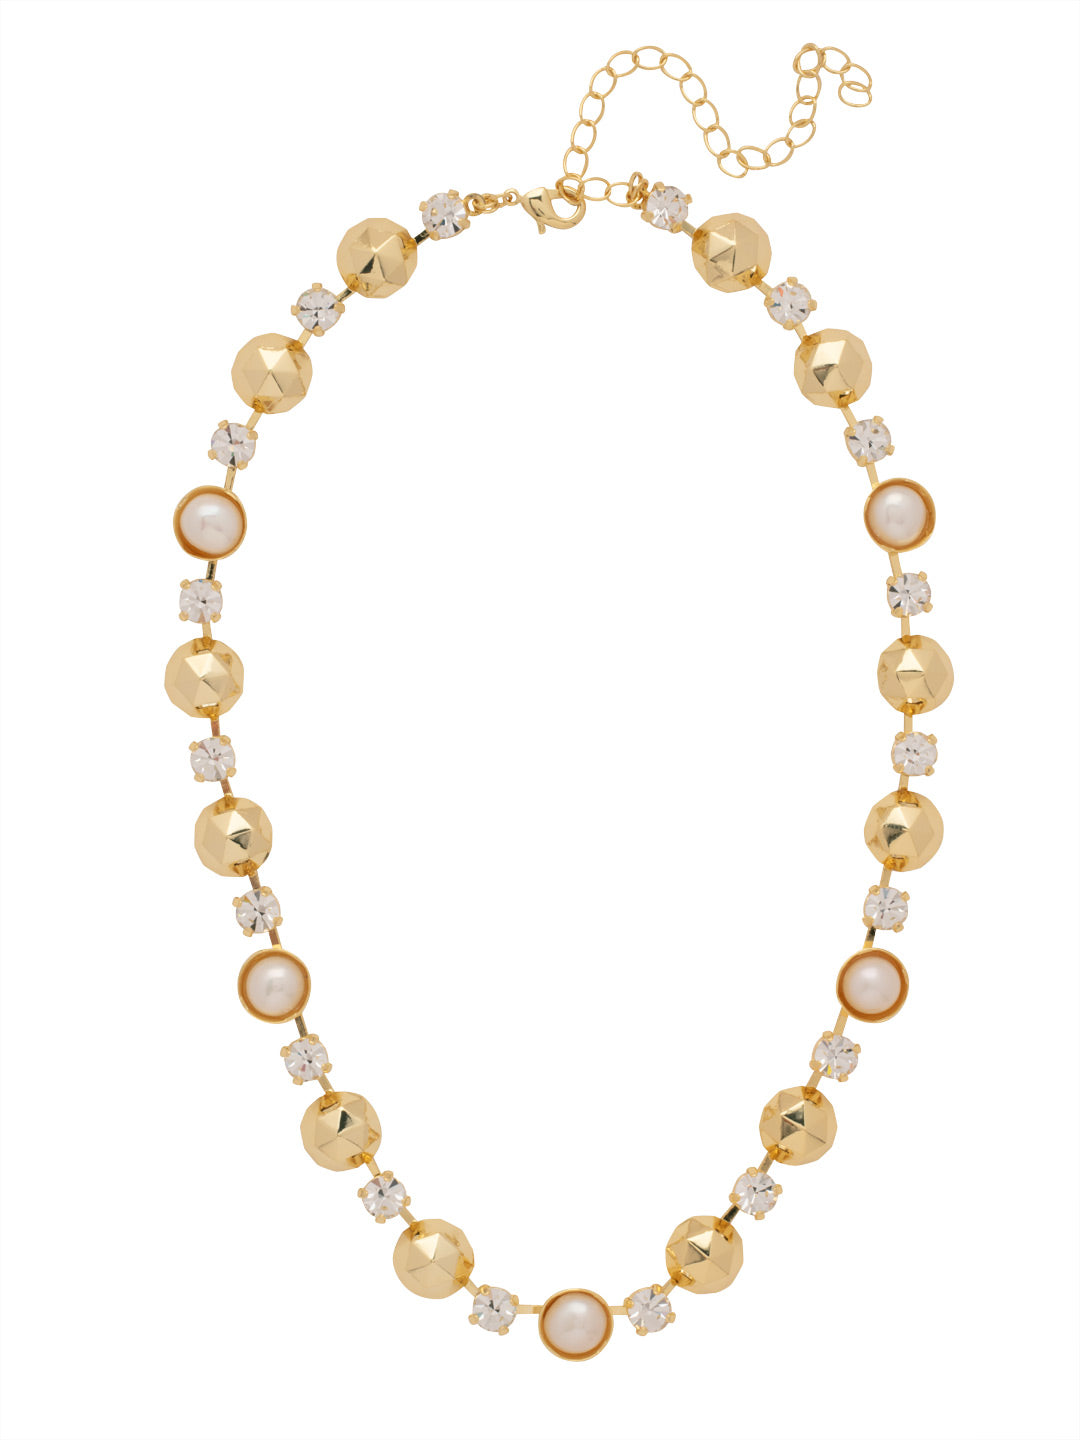 Avey Repeating Tennis Necklace - 4NFF5BGMDP - <p>The Avey Repeating Tennis Necklace features a full line of metal geometric charms, round cut crystals, and freshwater pearls on a trendy adjustable rope chain, secured by a lobster claw clasp. From Sorrelli's Modern Pearl collection in our Bright Gold-tone finish.</p>